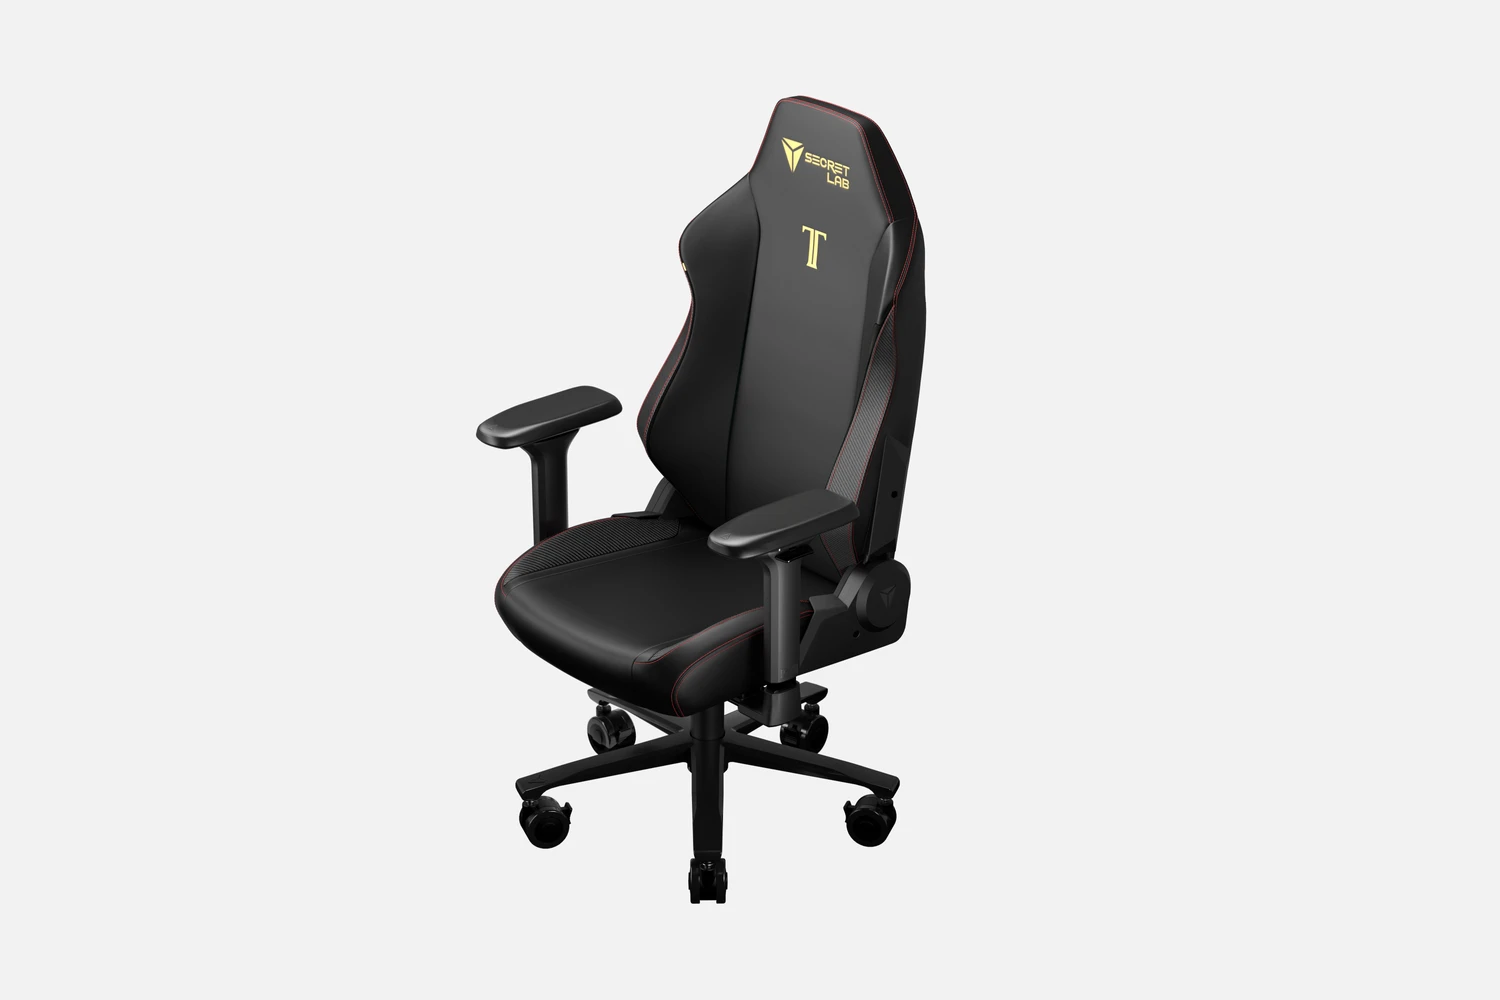 fullview shot of small black gaming chair